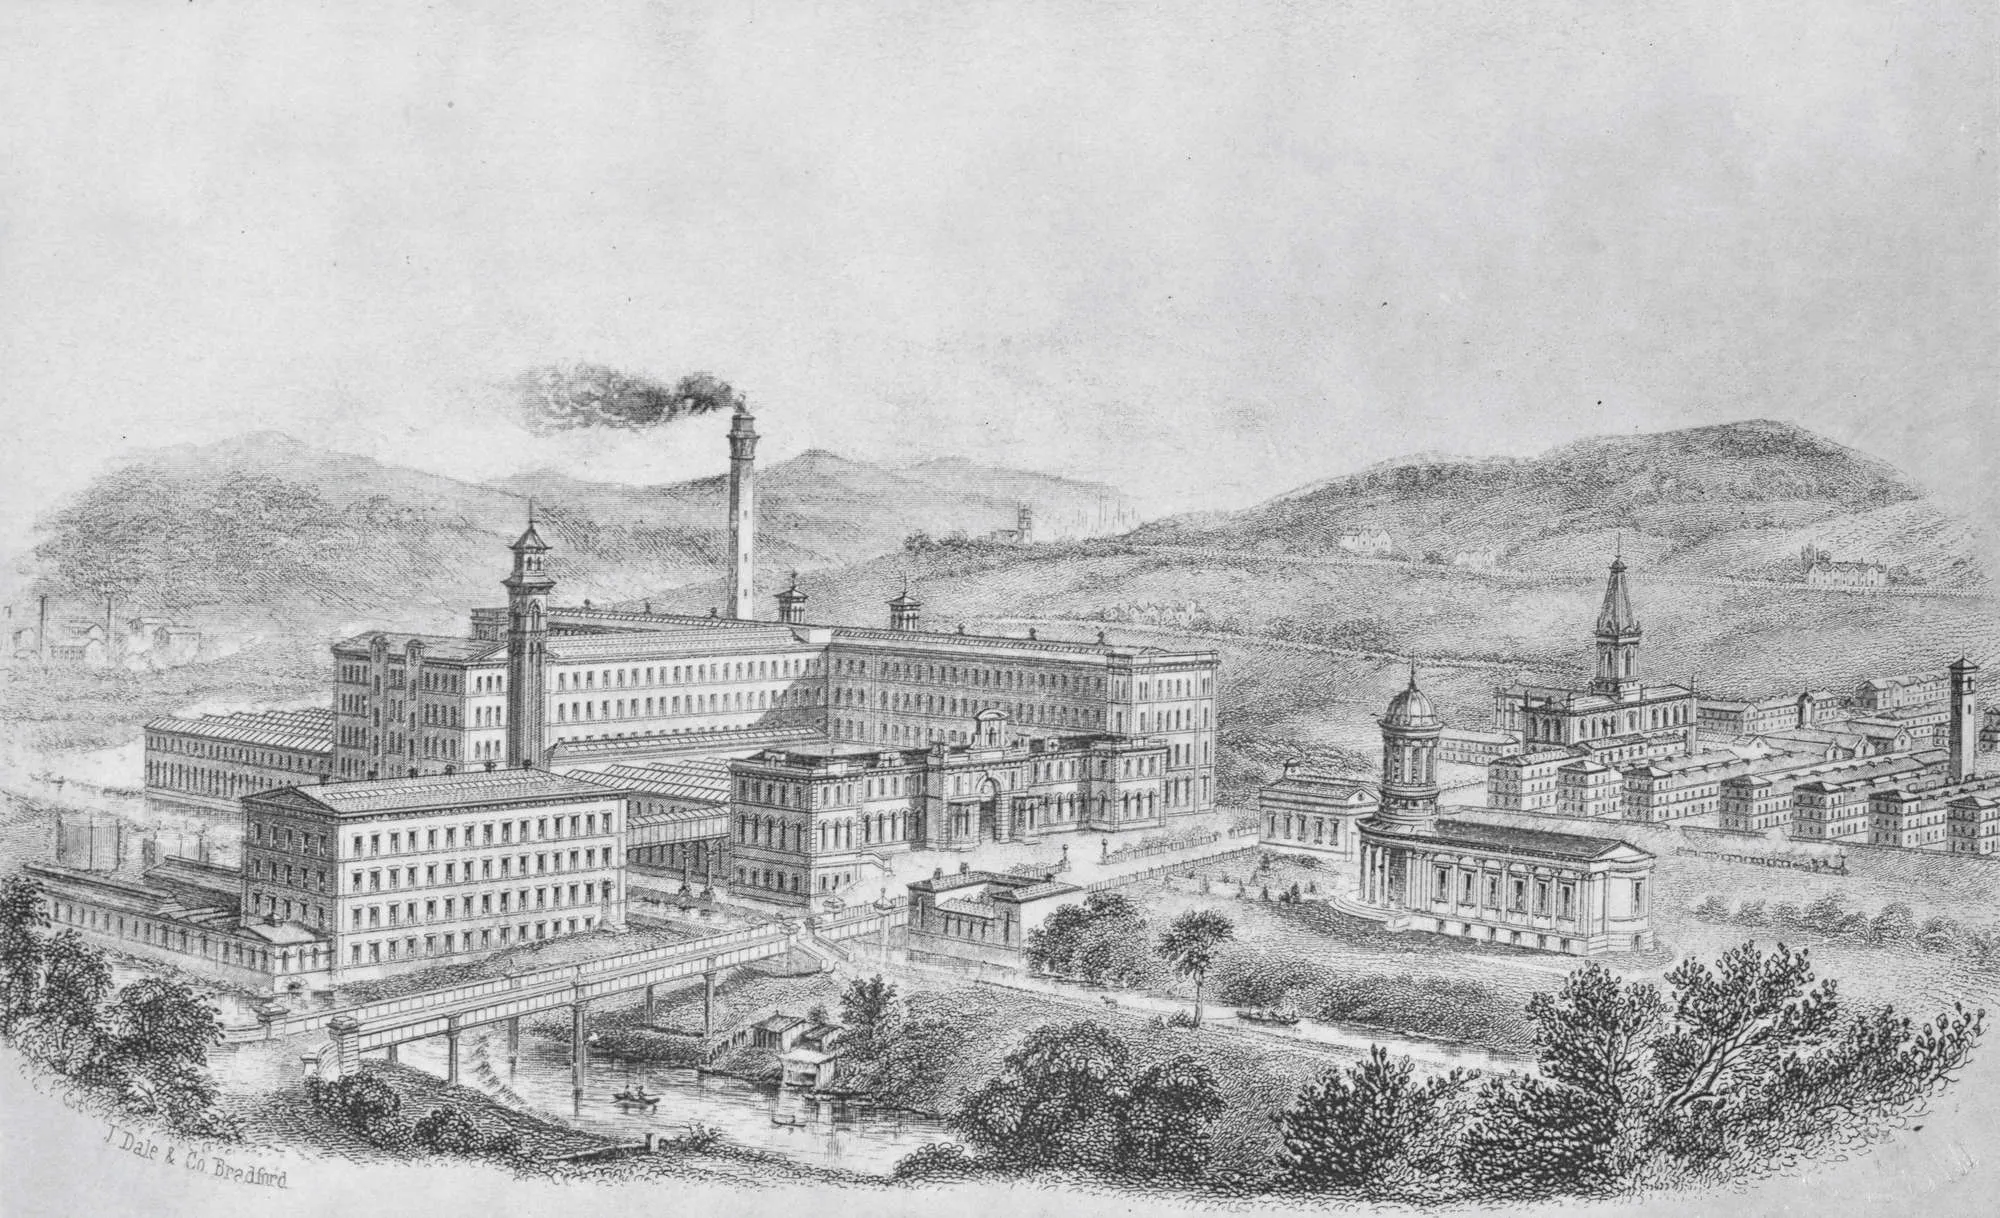 Saltaire, London British Library, 1877.